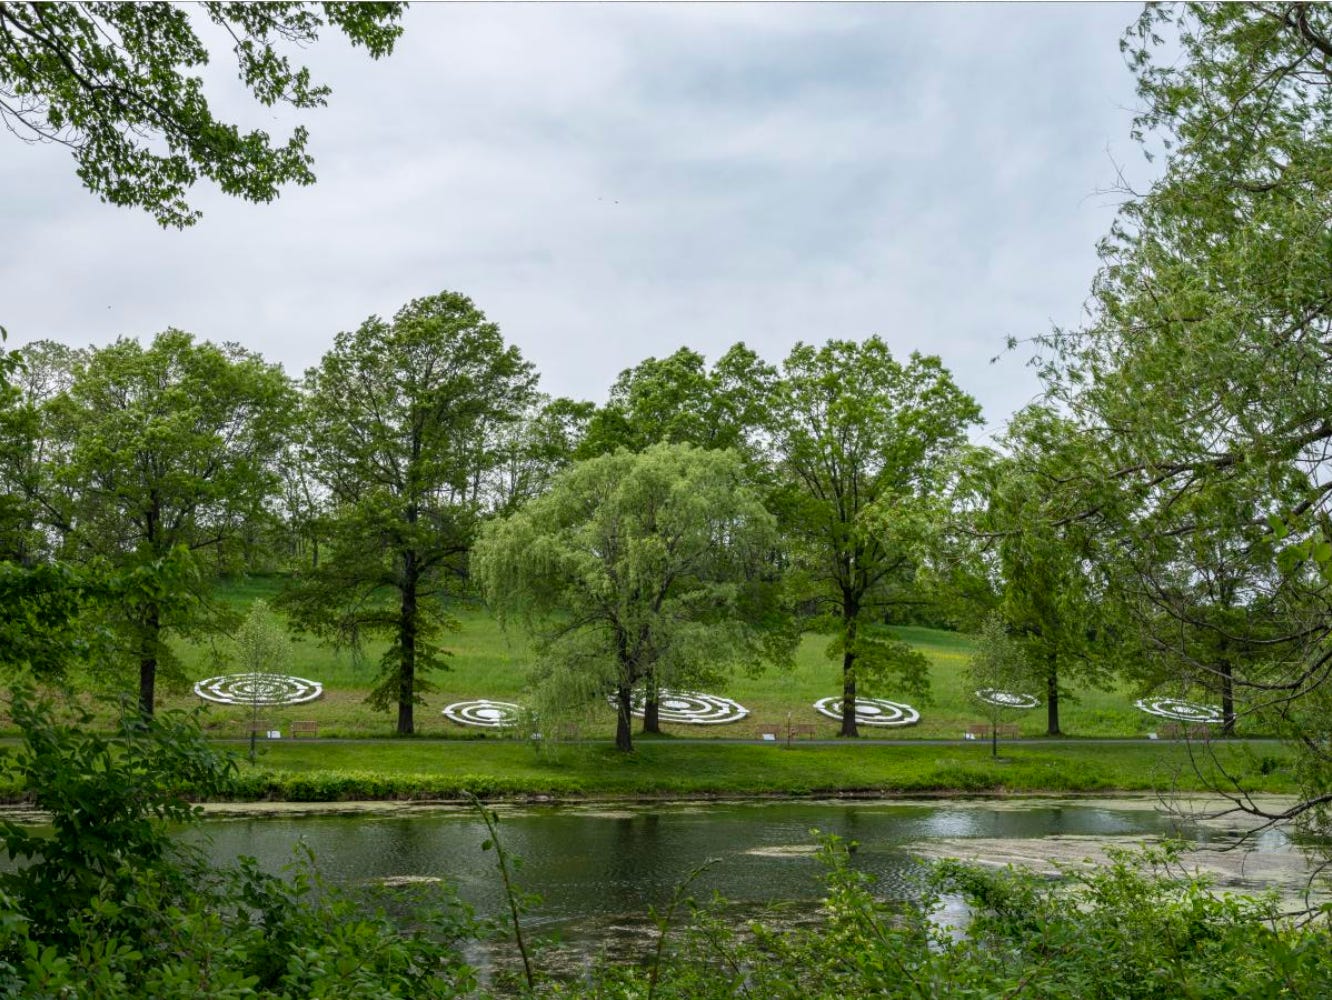 Installation view of large metal concentric circles on grass, across a lake and behind several trees.